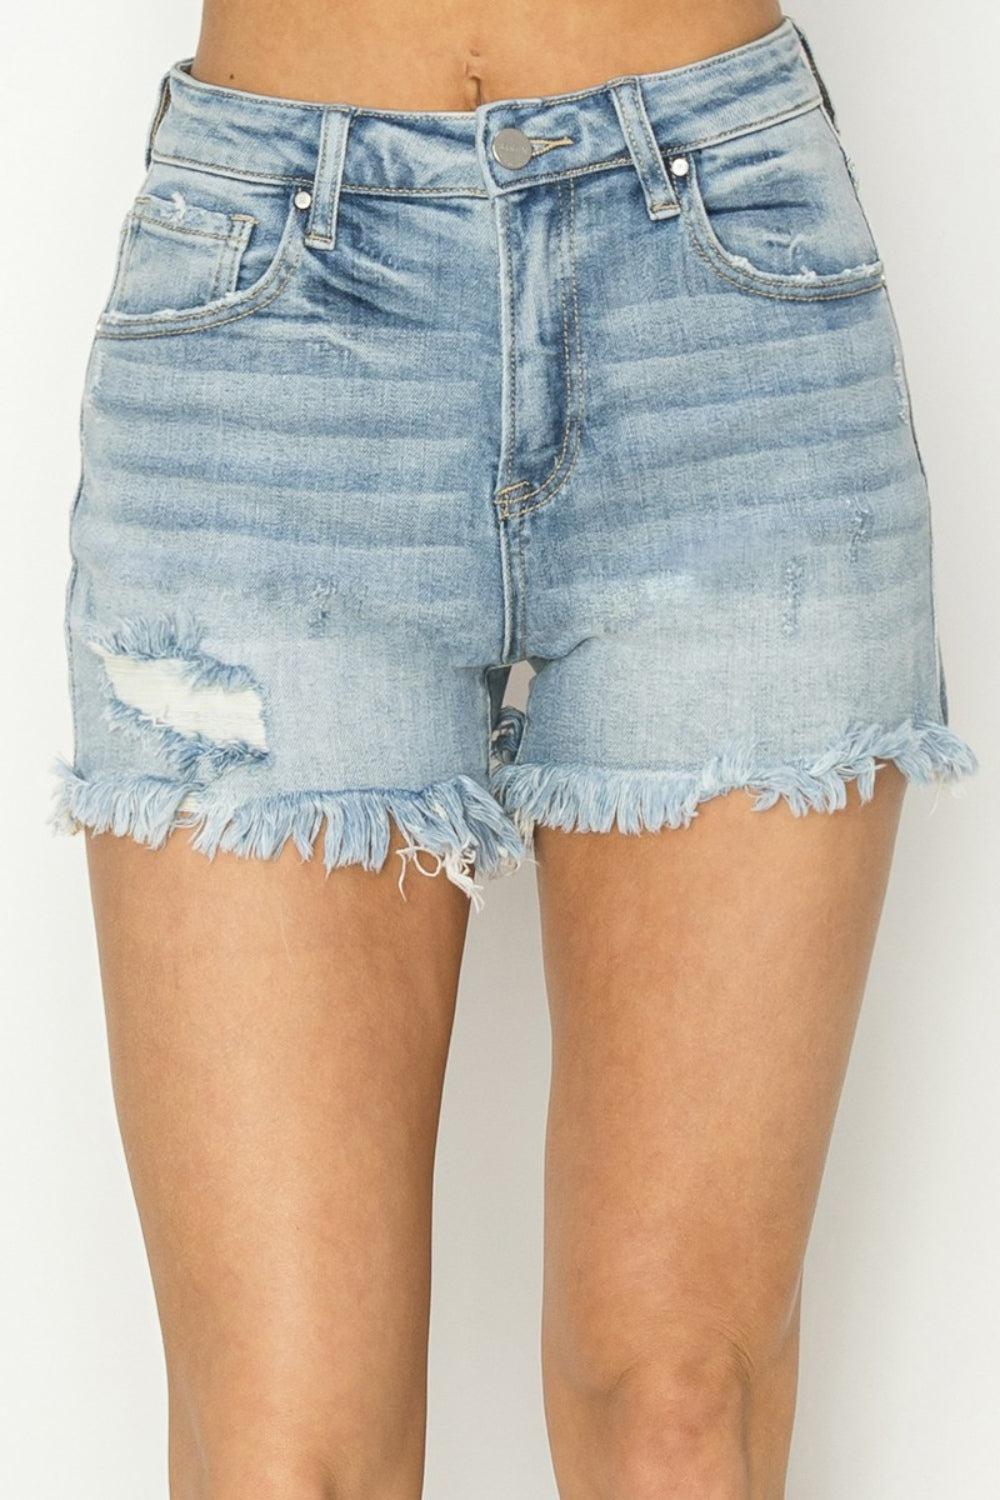 a close up of a person wearing shorts